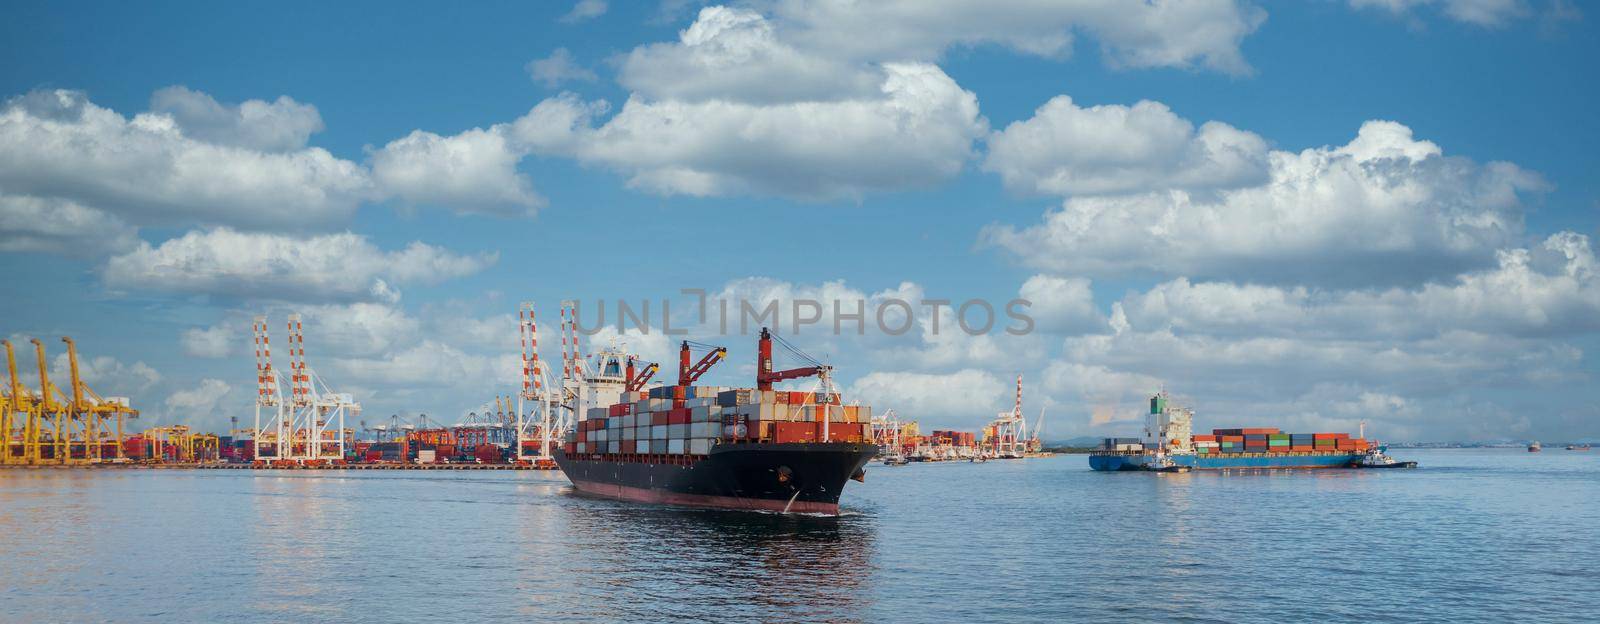 Aerial view container ship at industrial port import export global business company logistic transportation international by container ship, Container cargo vessel freight ship industrial.